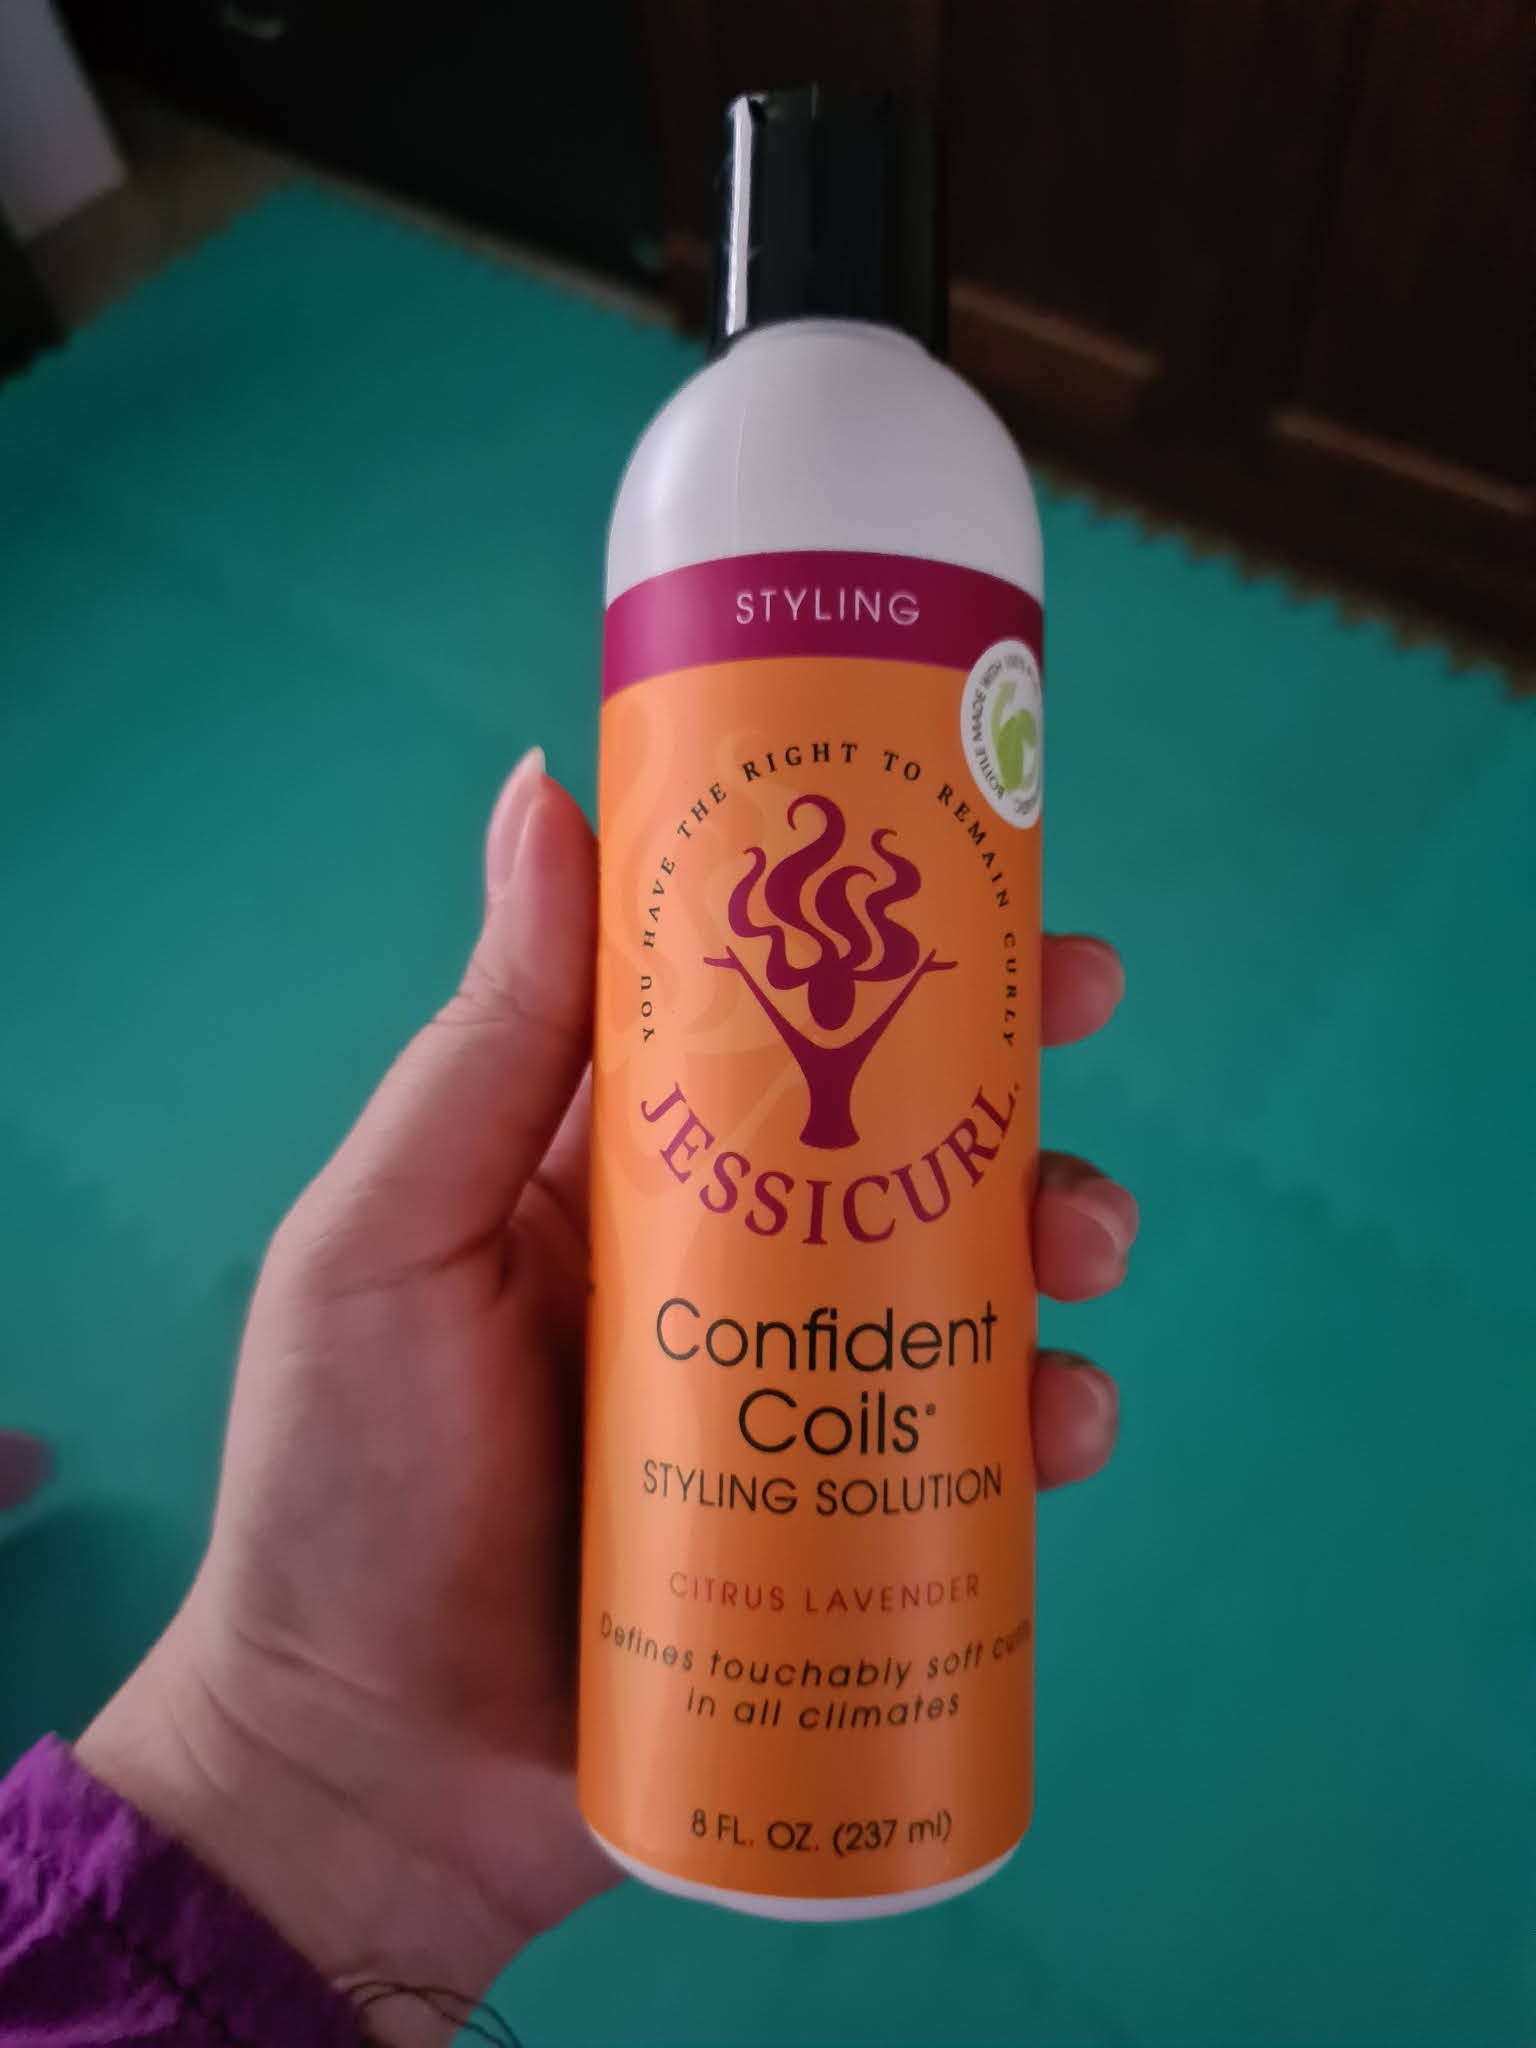 Jessicurl Confident Coils Styling Solution